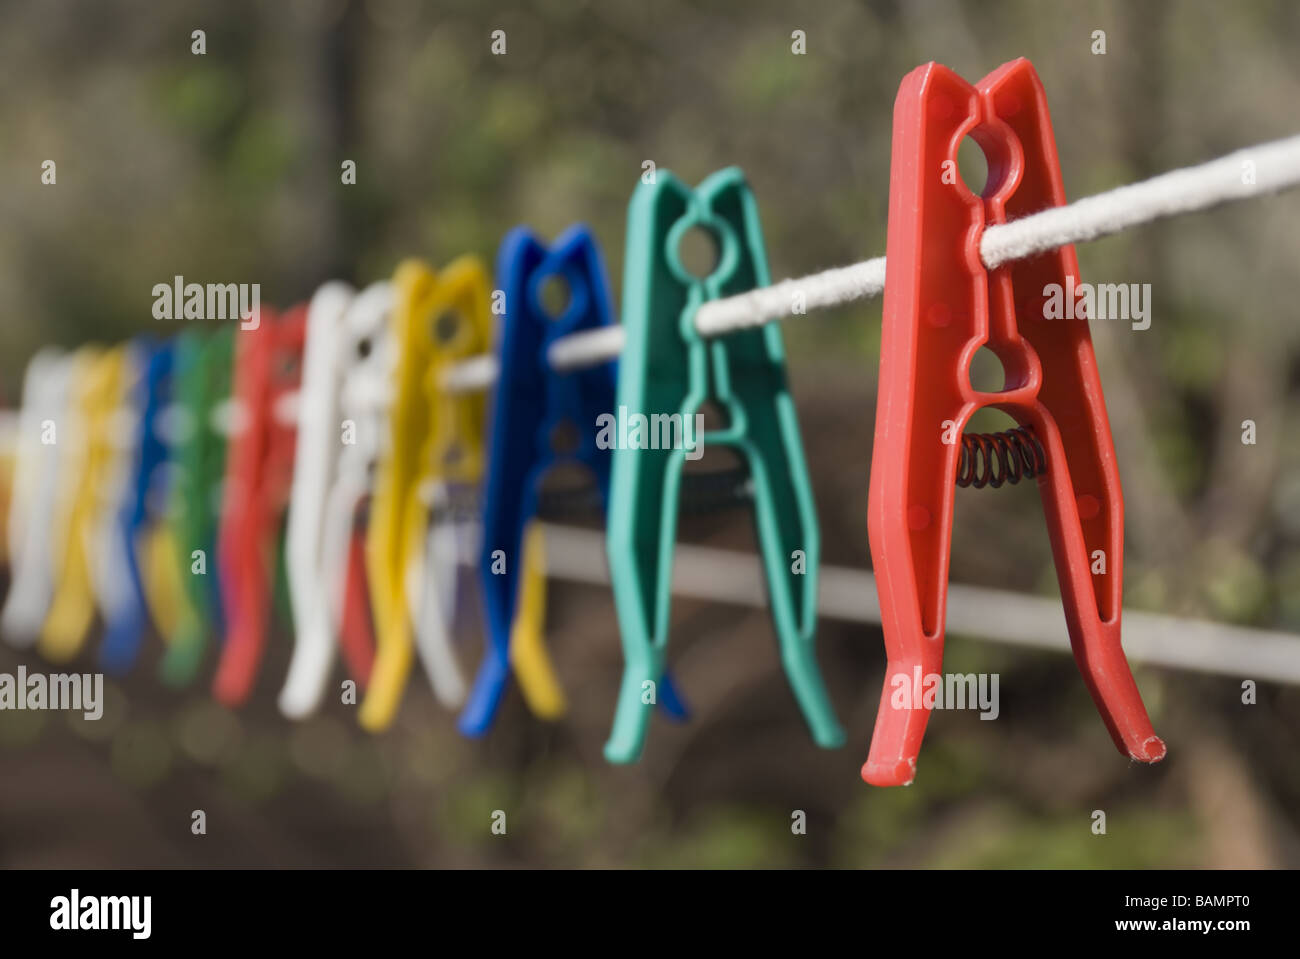 Lots of bright coloured plastic clothes pegs on a washing line Stock Photo